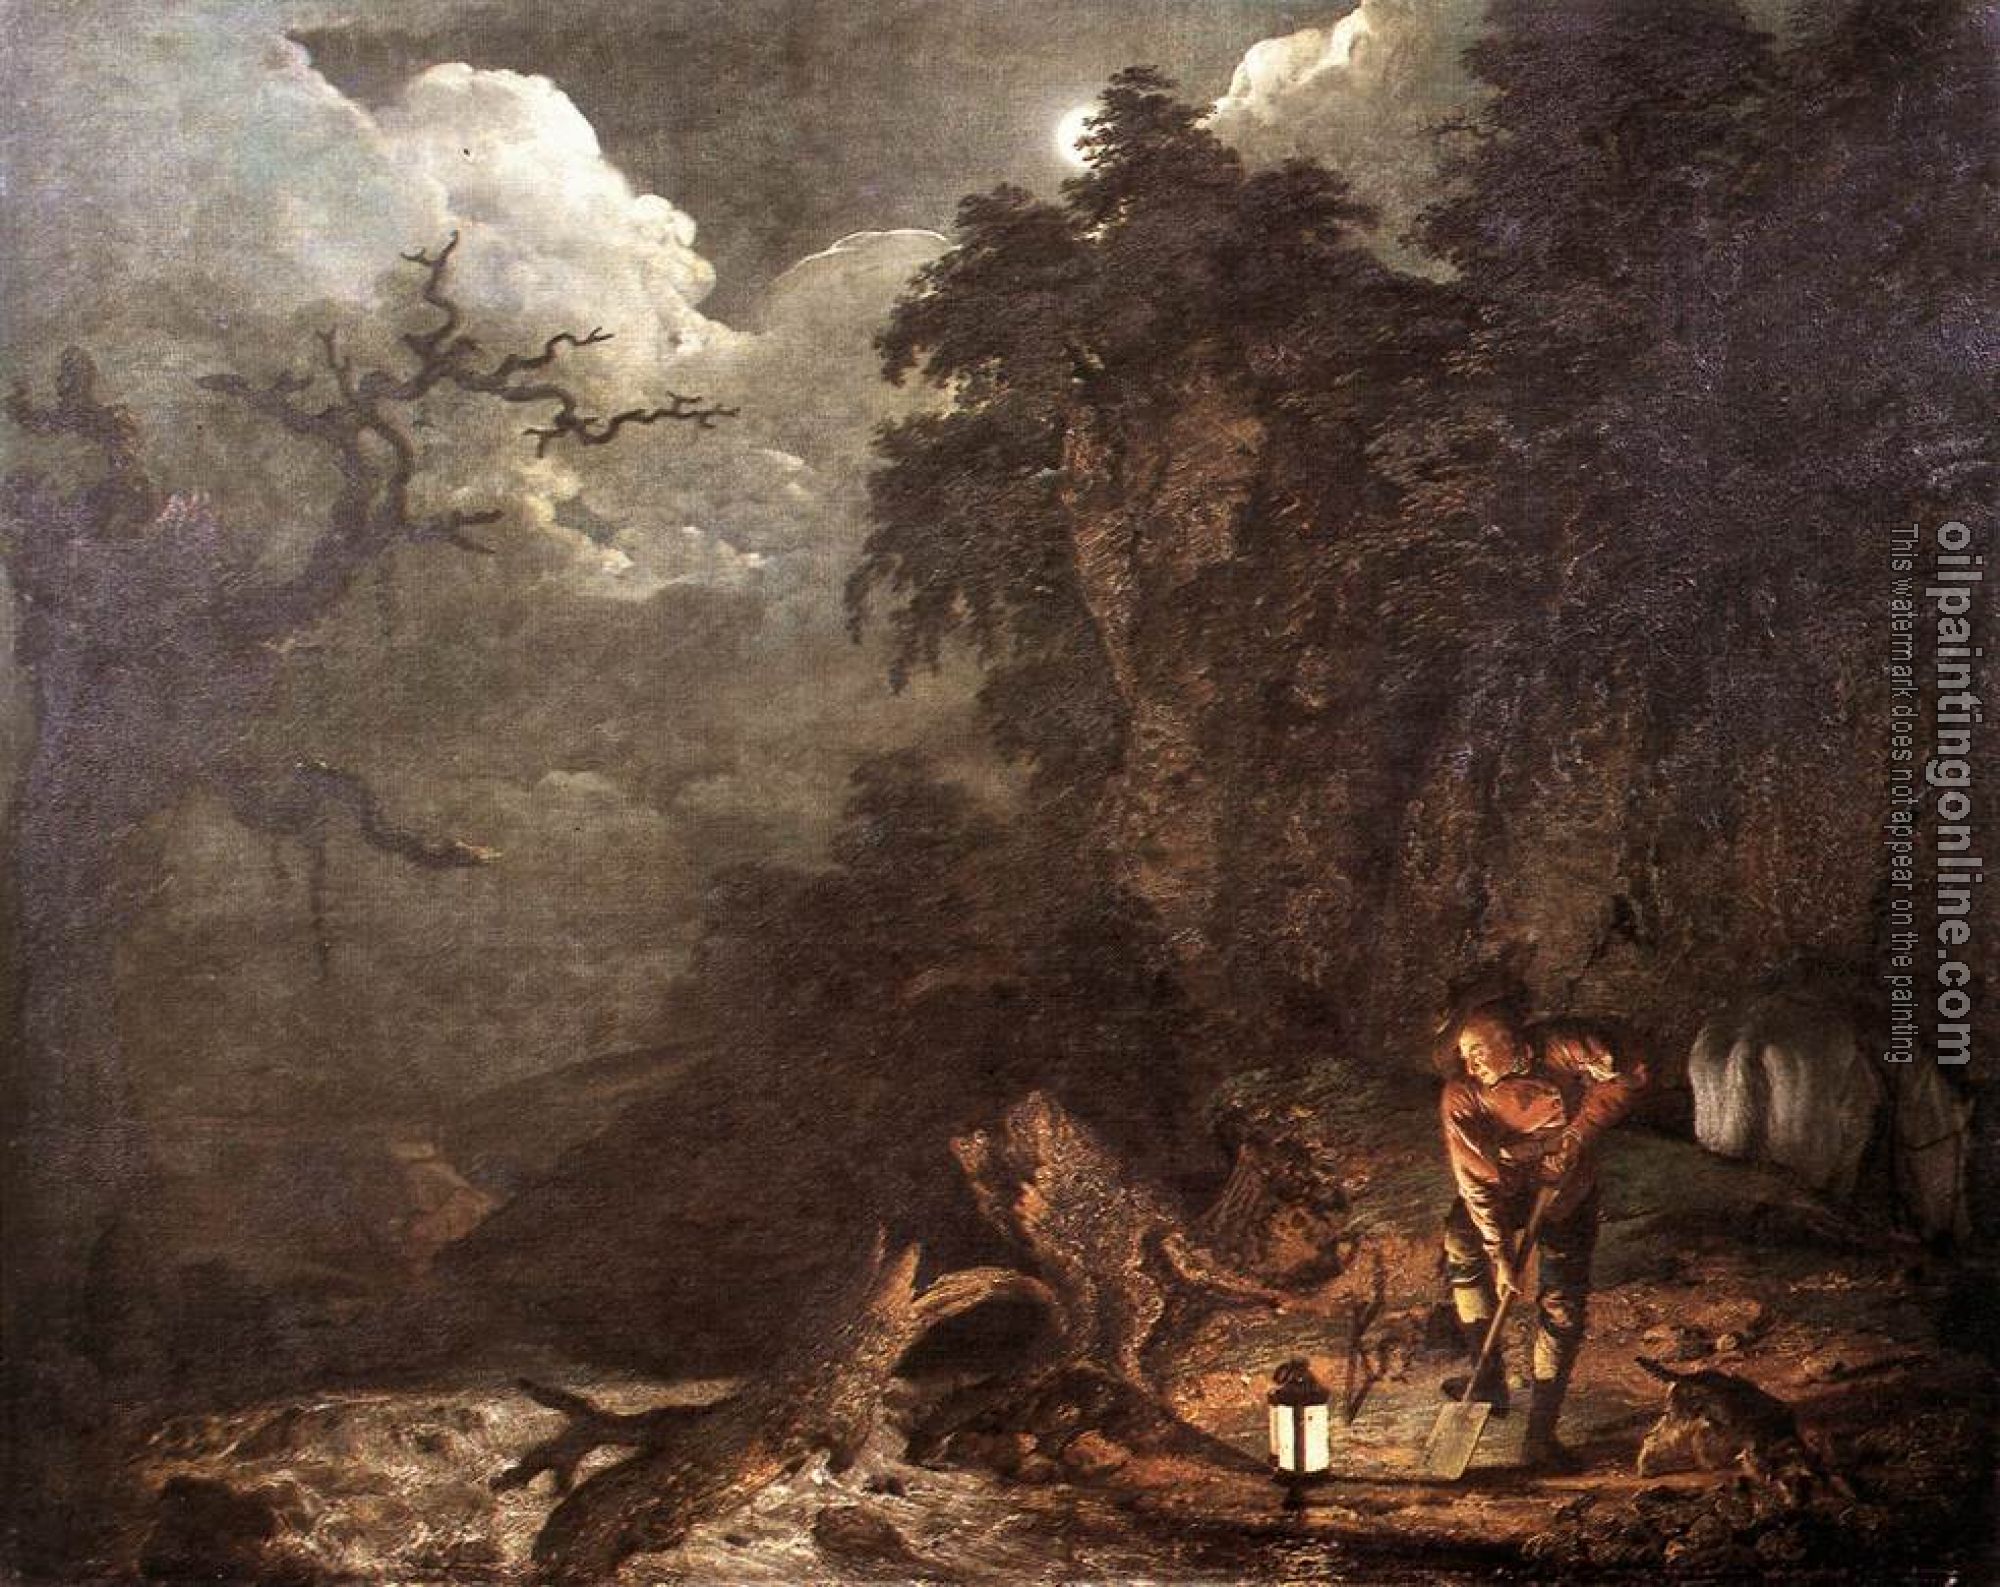 Joseph Wright of Derby - Earthstopper at the Bank of Derwent